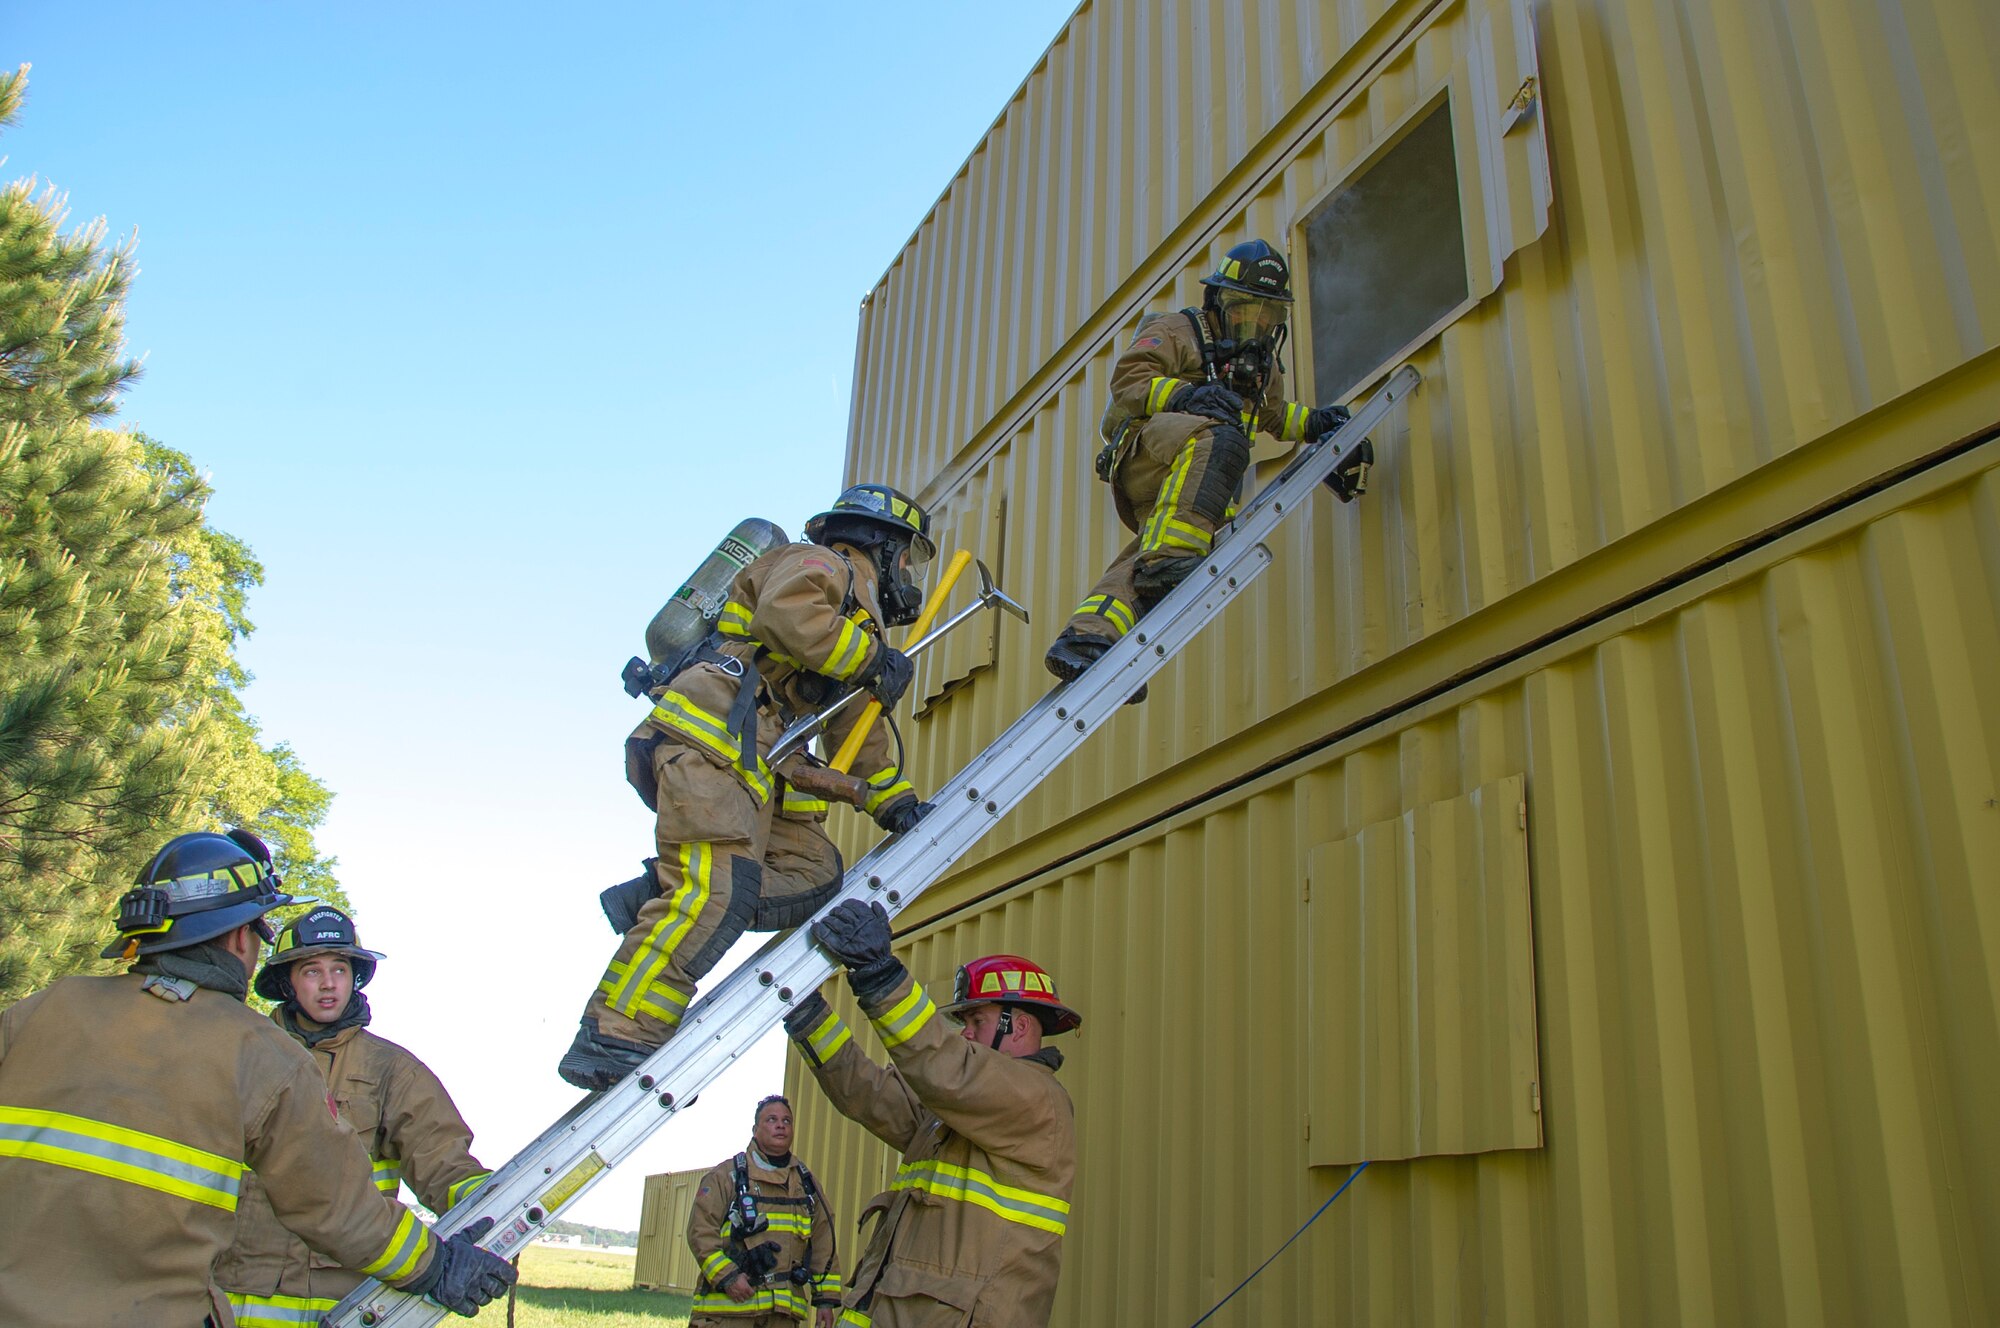 Air Force Reserve firefighters enter a building to rescue a downed firefighter during a training scenario for the first-ever Air Force Reserve Command Firefighter Rescue and Survival Course at Dobbins Air Reserve Base, Ga., April 18, 2017. Twenty Citizen Airmen participated in the intense 50-hour course held at the 622nd Civil Engineer Group expeditionary combat support-training certification center, which focused on a Rapid Intervention Crew, or RIC. The RIC is a dedicated and specially trained group of firefighters whose responsibilities include safely evacuating a distressed firefighter from a structure. (U.S. Air Force photo by Master Sgt. Theanne K. Herrmann)